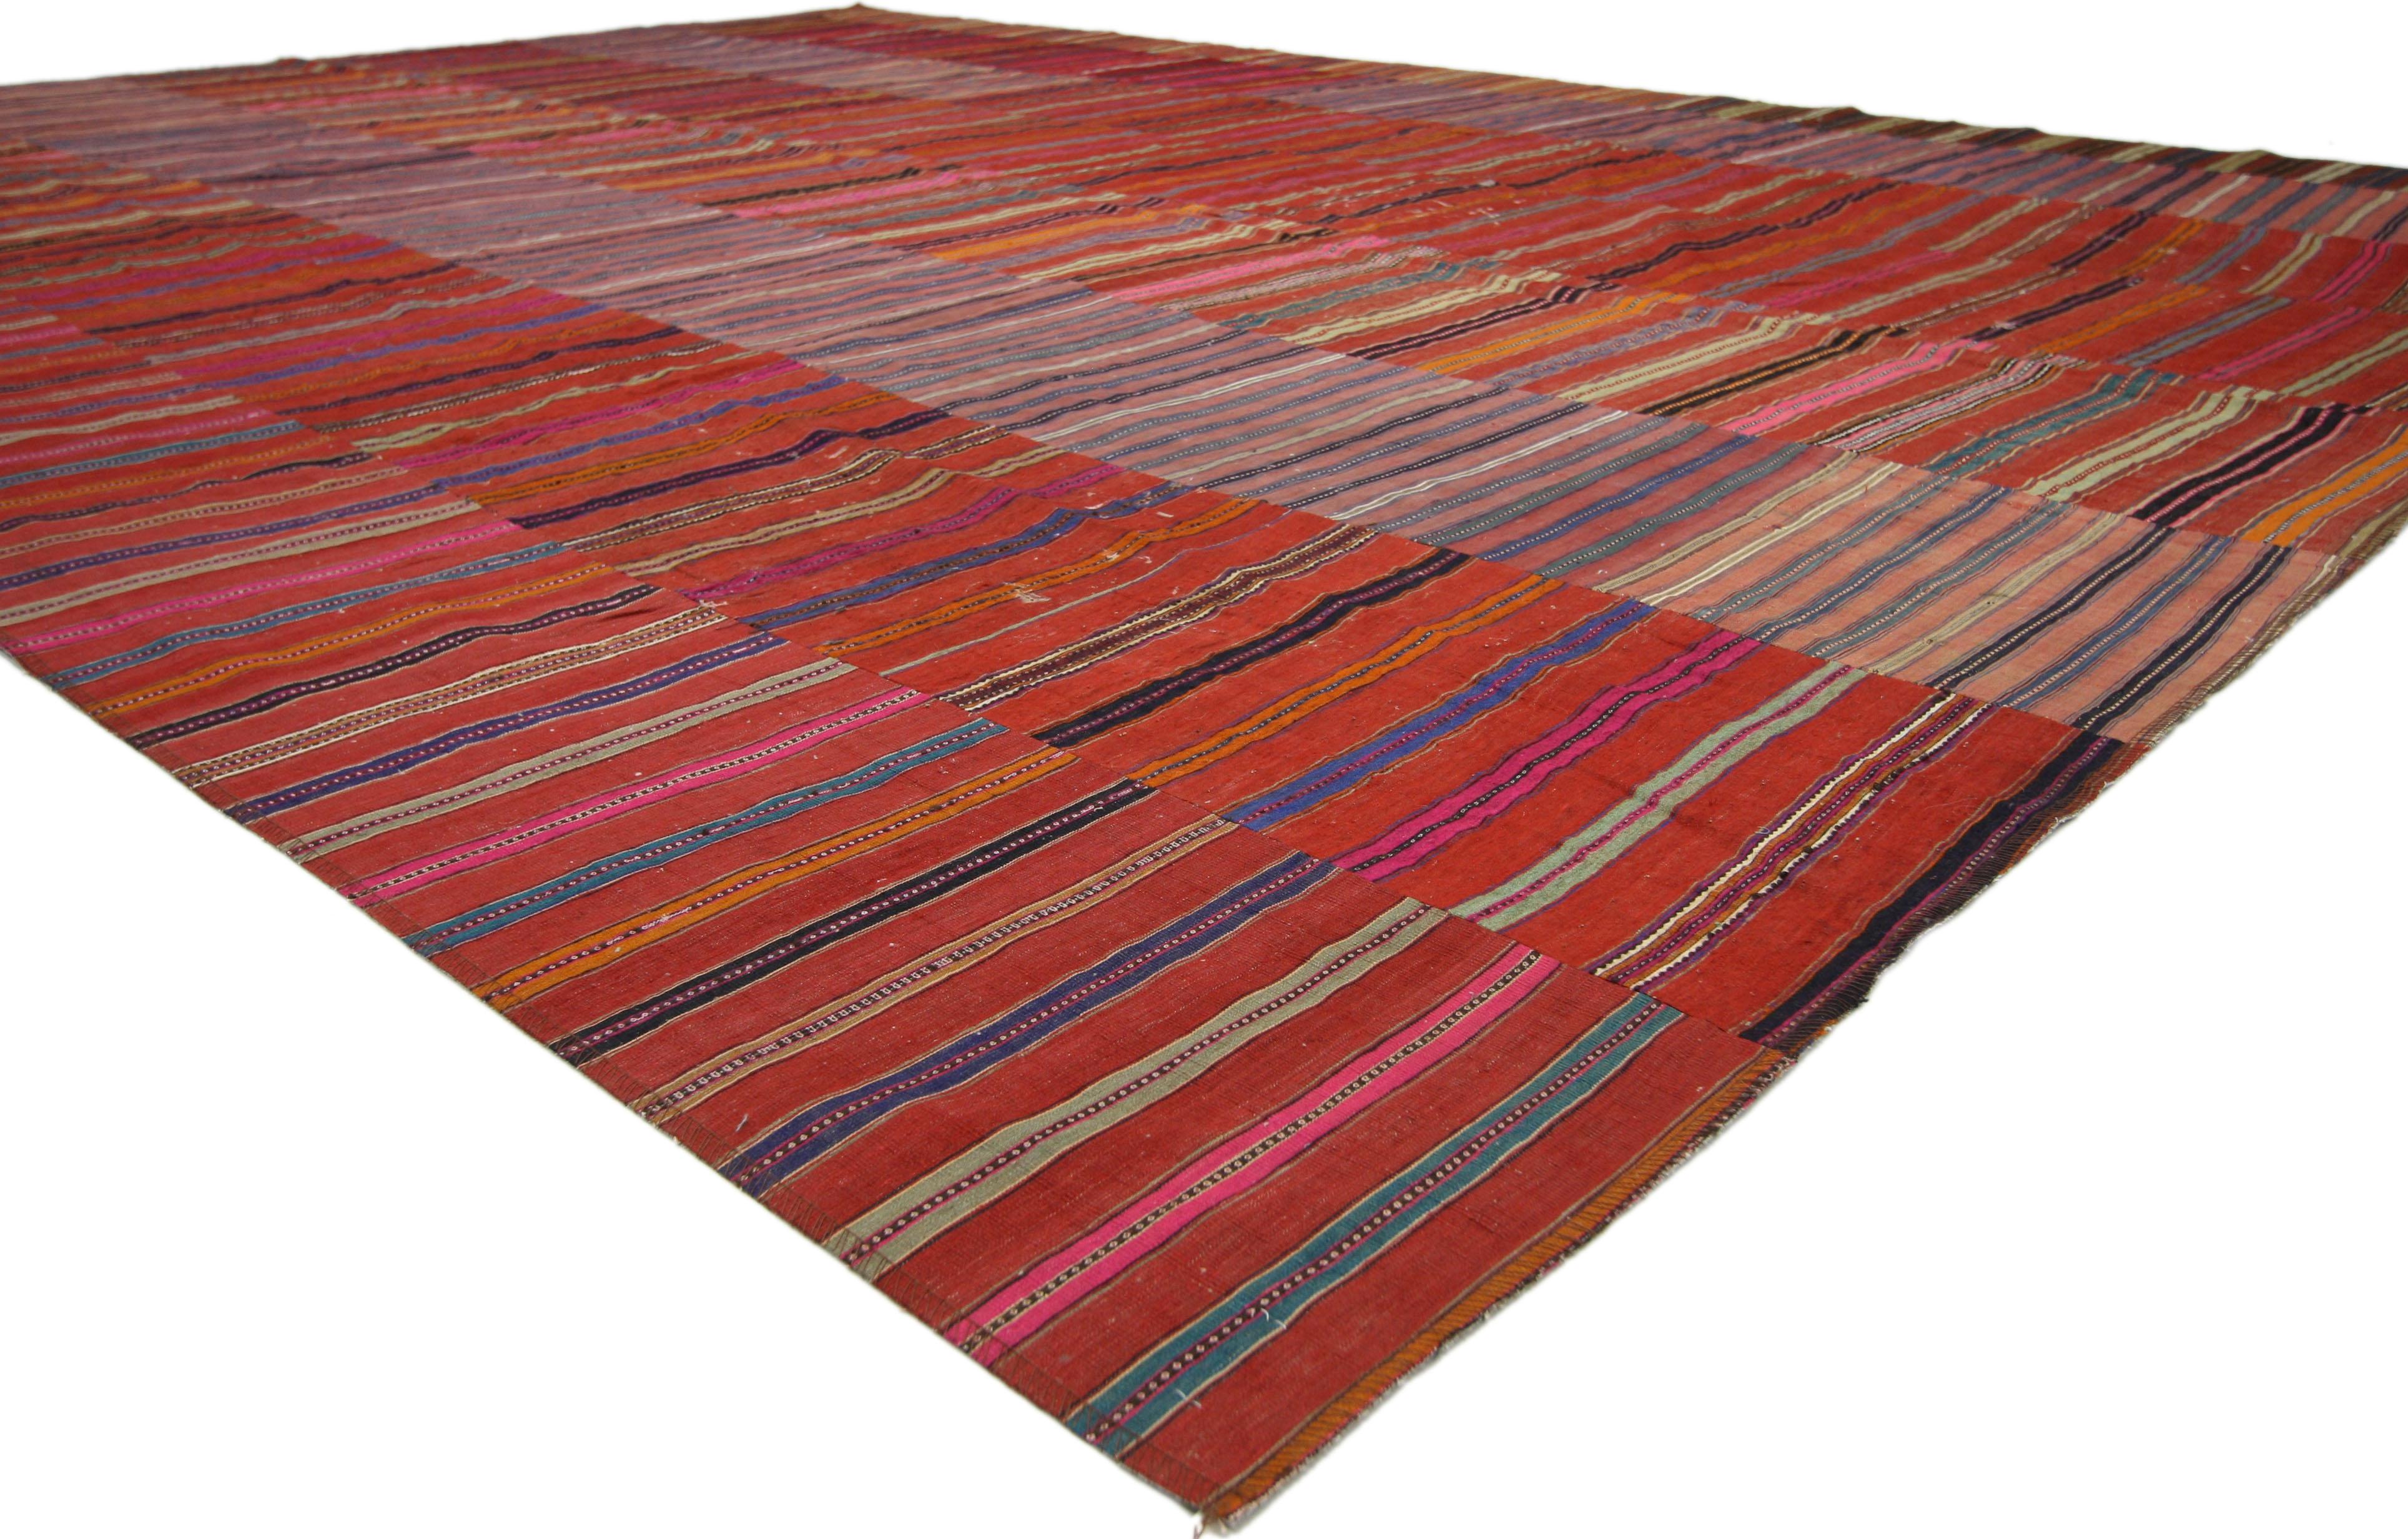 60640 Distressed Vintage Turkish Striped Kilim Rug with Modern Rustic Cabin Style 09'07 x 12'11. With its rustic sensibility and rugged beauty, this hand-woven wool vintage Turkish striped kilim rug manages to meld contemporary, modern, and